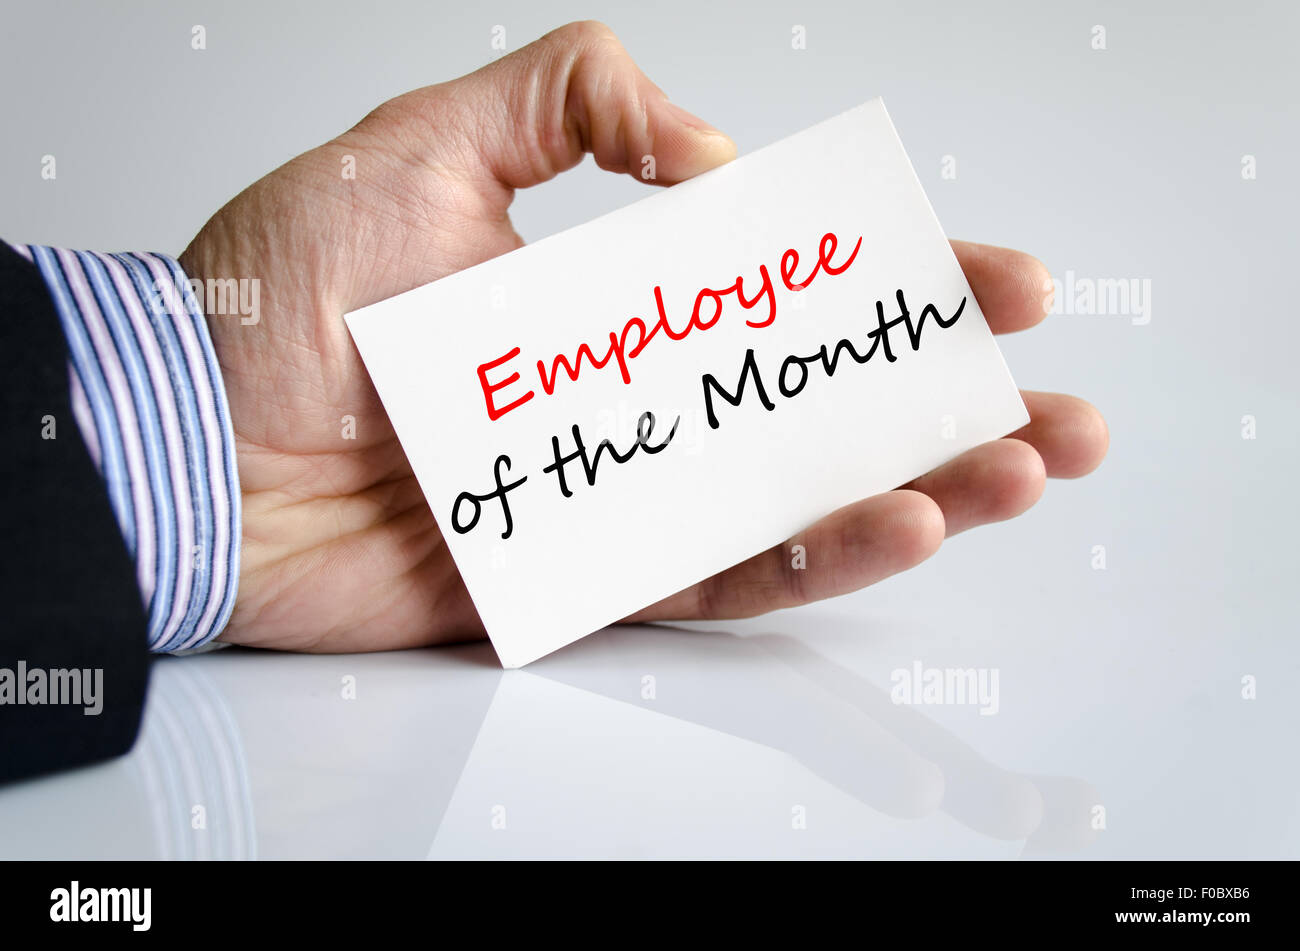 Employee of the month text concept isolated over white background Stock Photo